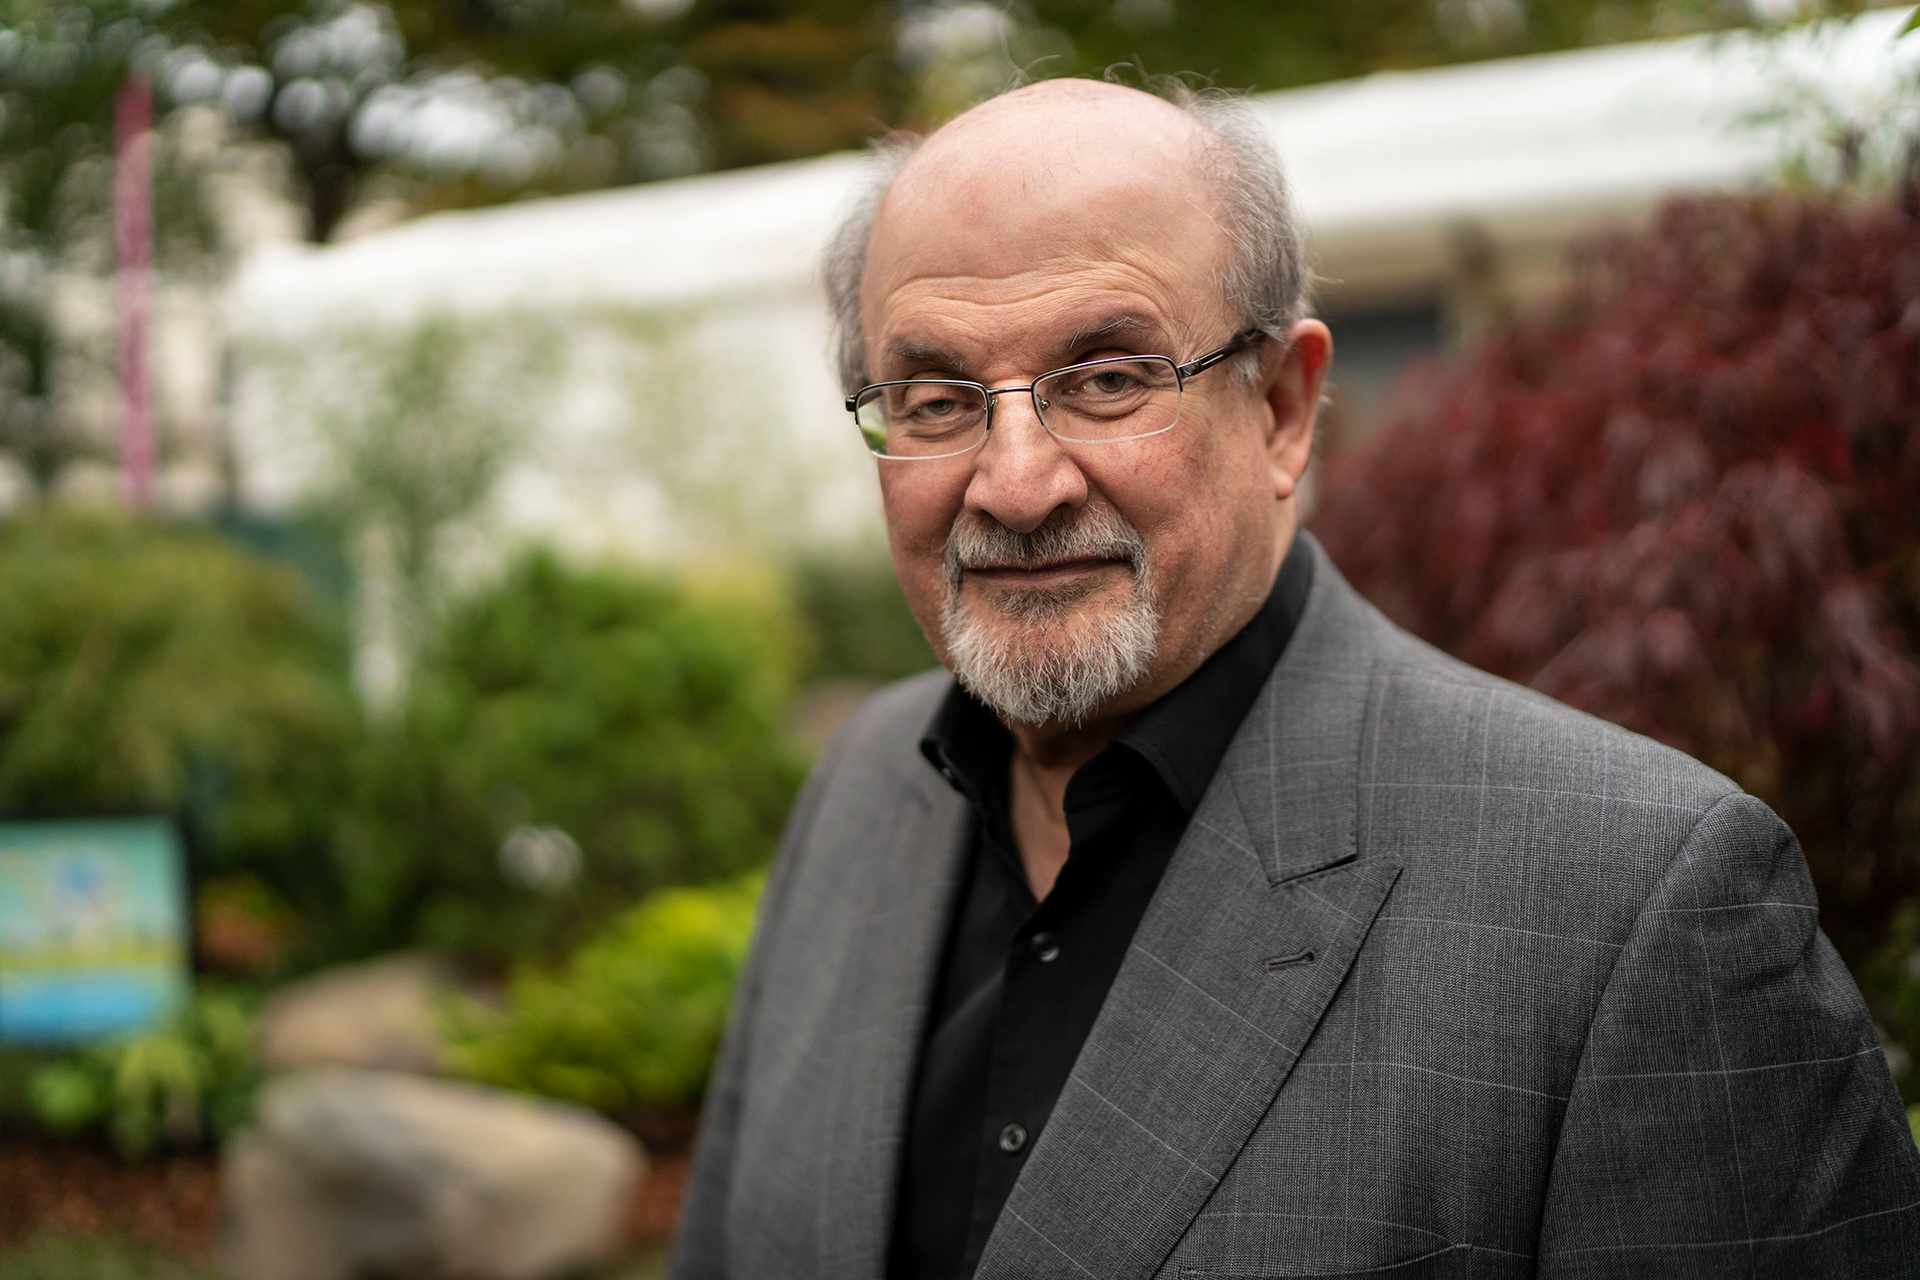 Salman Rushdie was attacked by an Islamic fundamentalist while giving a lecture in New York (Getty Images)